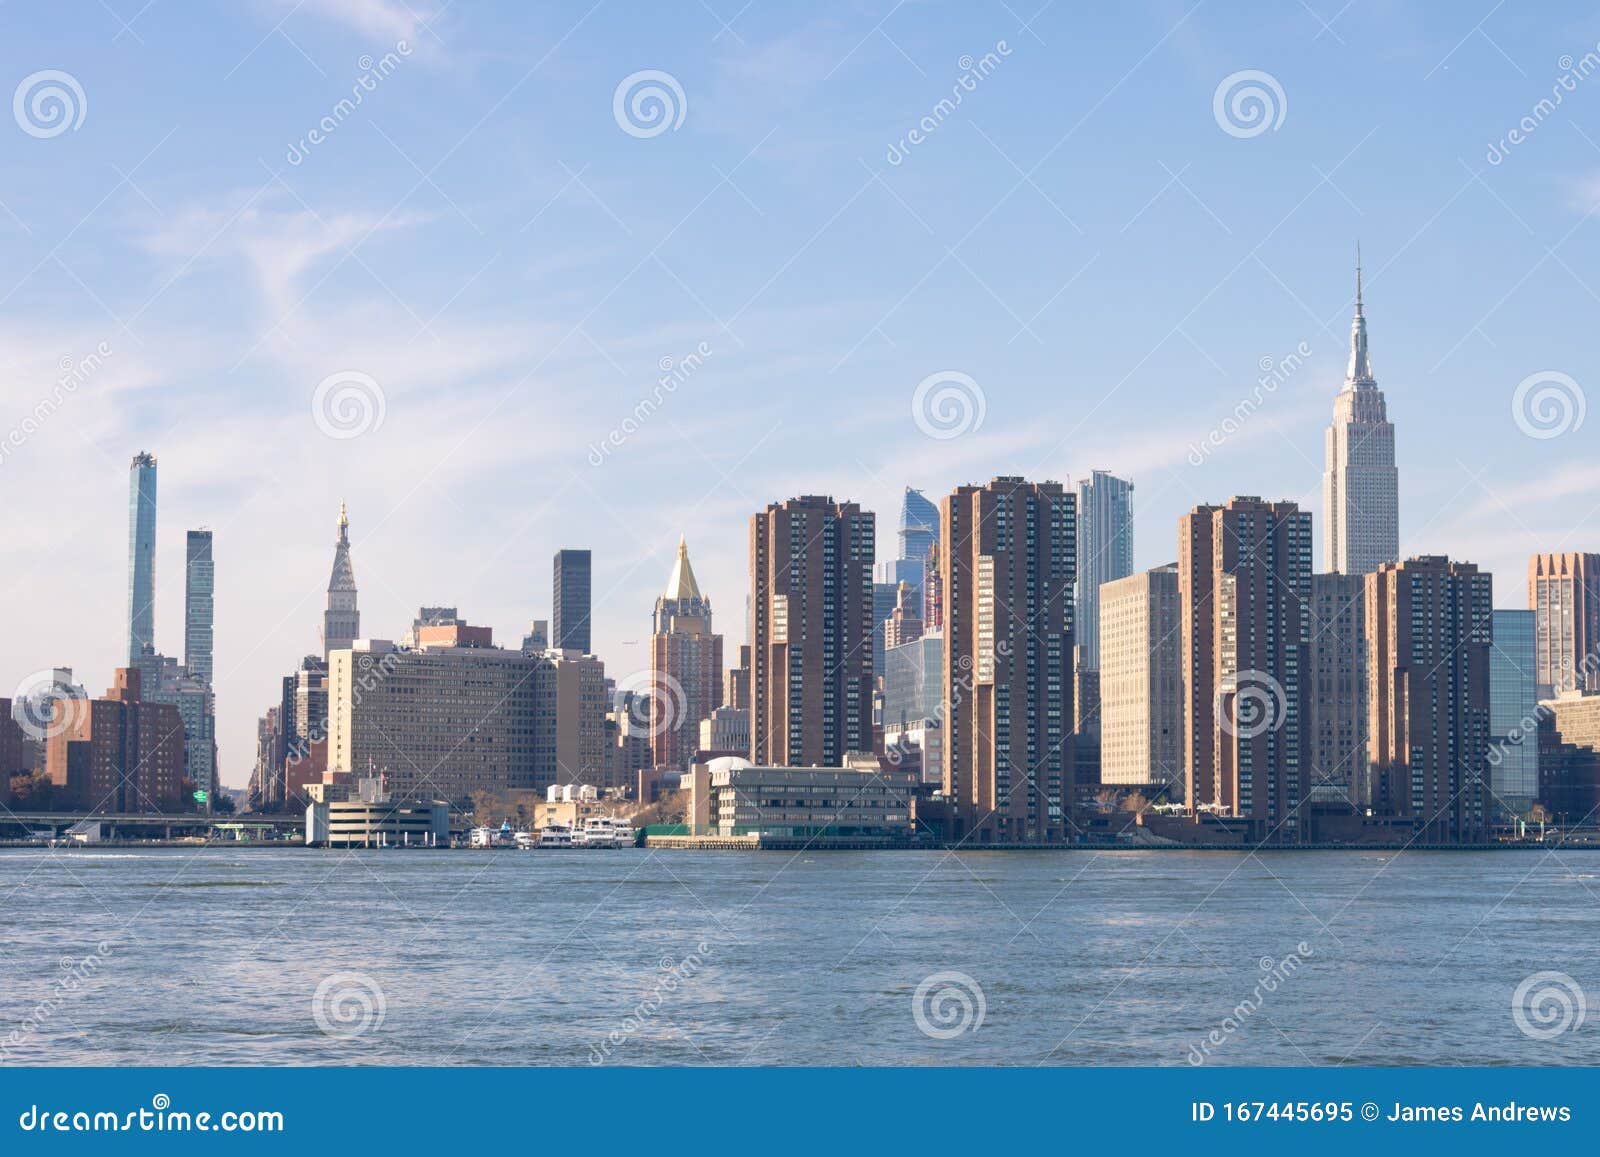 manhattan skylines of the murray hill and kips bay neighborhoods along the east river in new york city